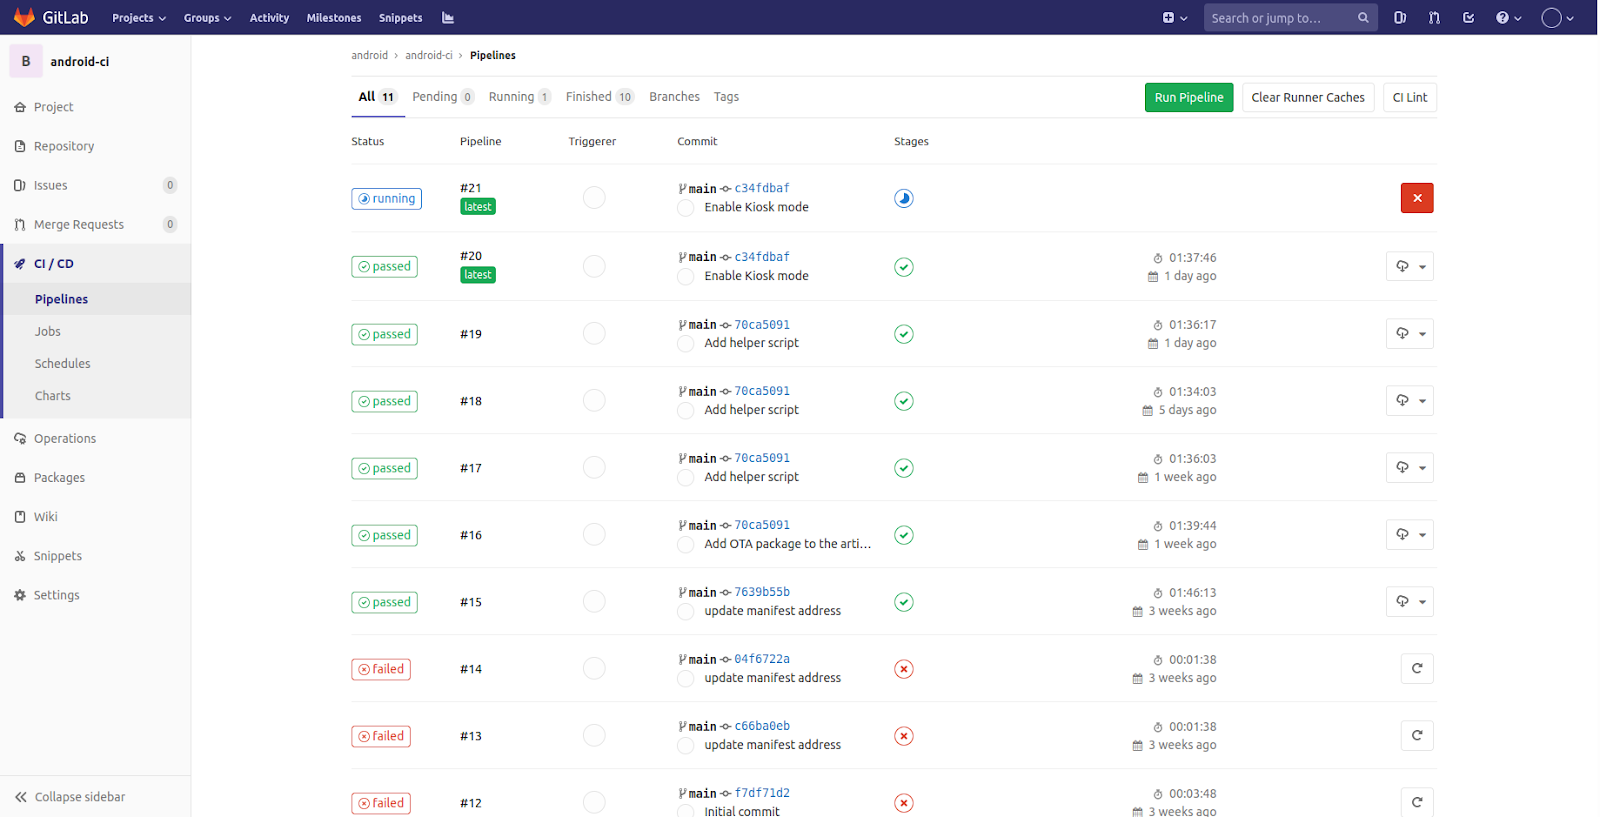 Screenshot of Android CI in GitLab